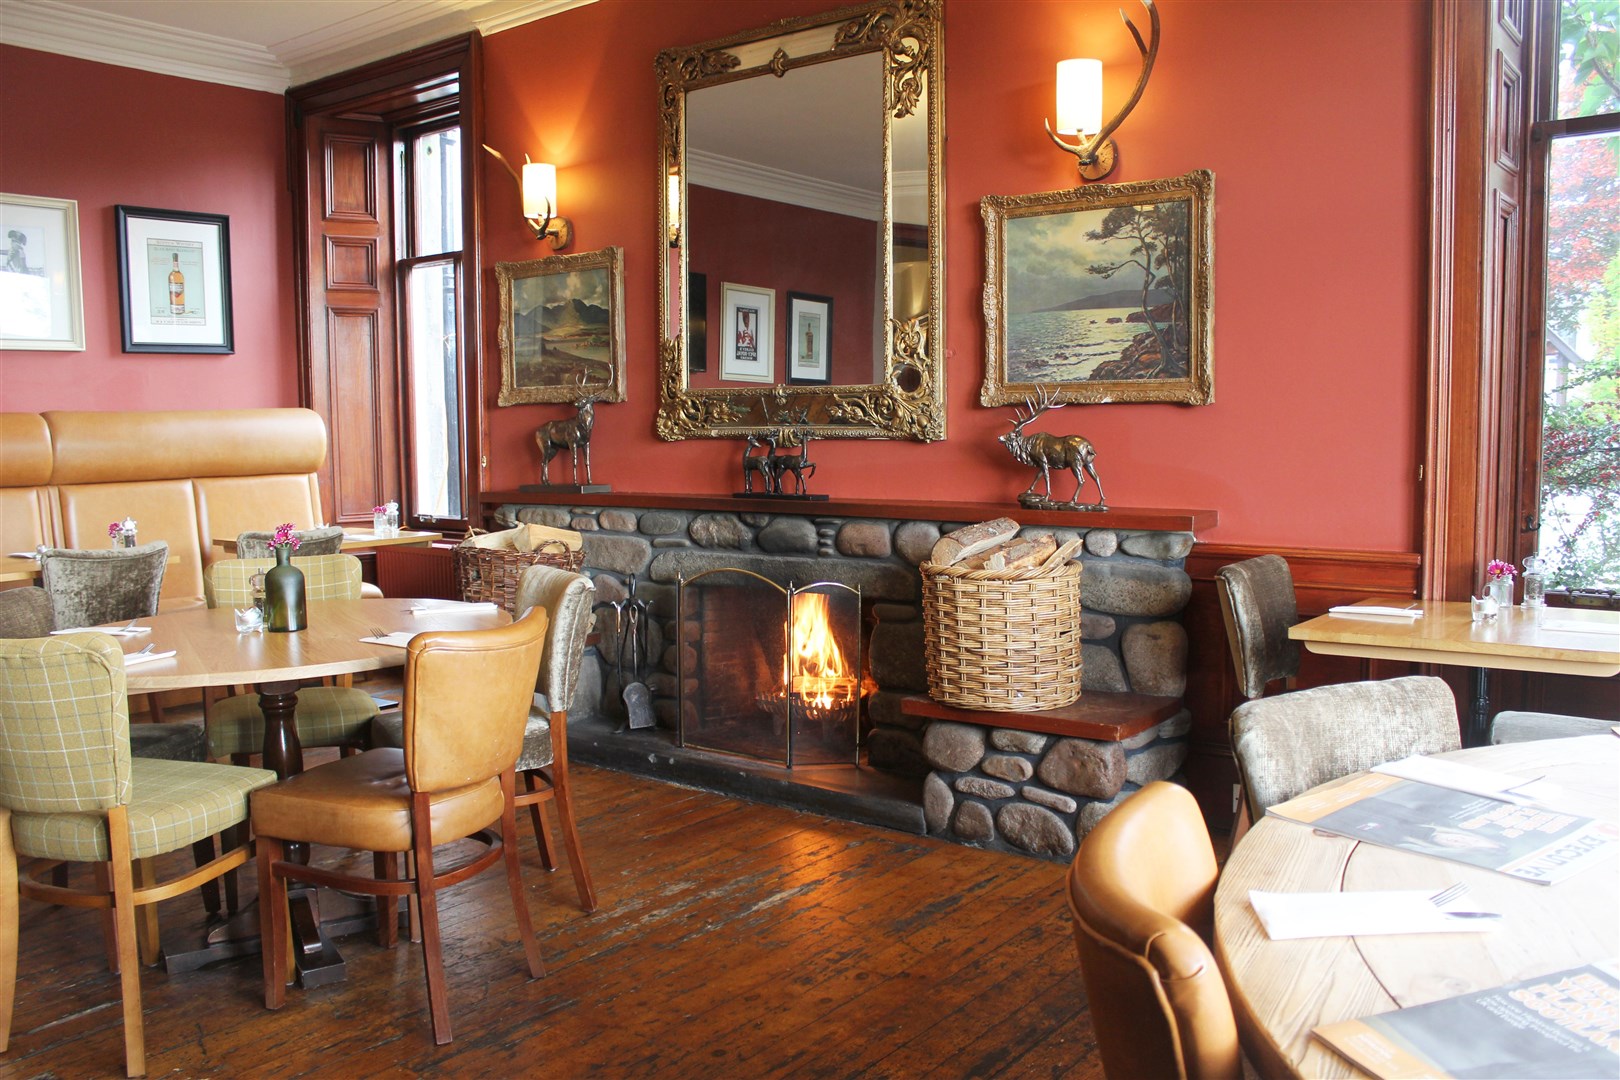 The cosy logfire will welcome you after walks on frosty days.